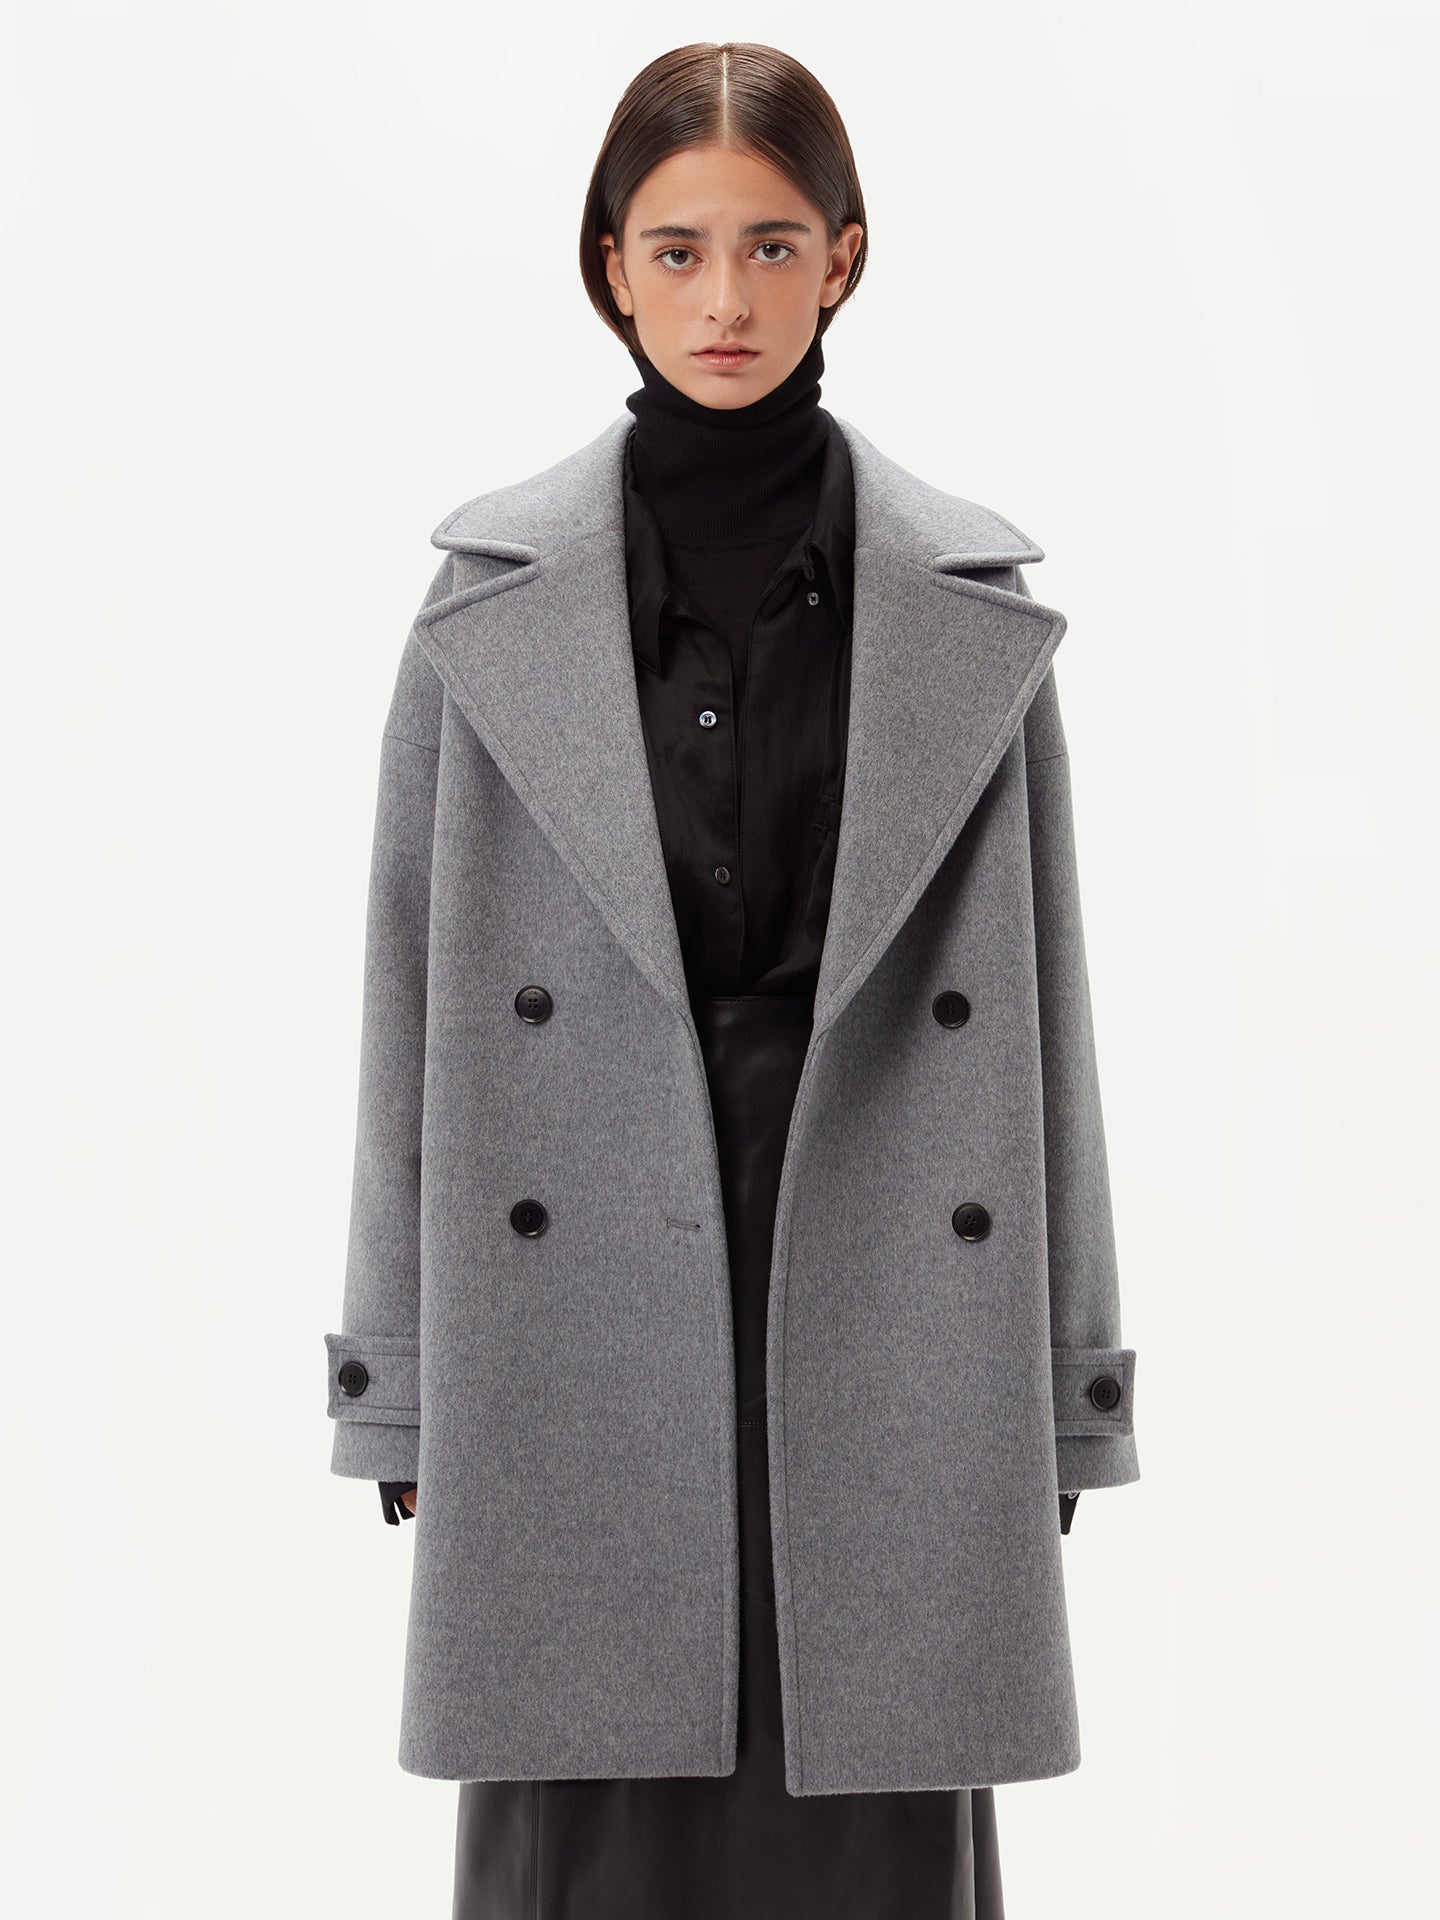 Women's Cashmere Double-Breasted Cashmere Peacoat Dim Gray - Gobi Cashmere